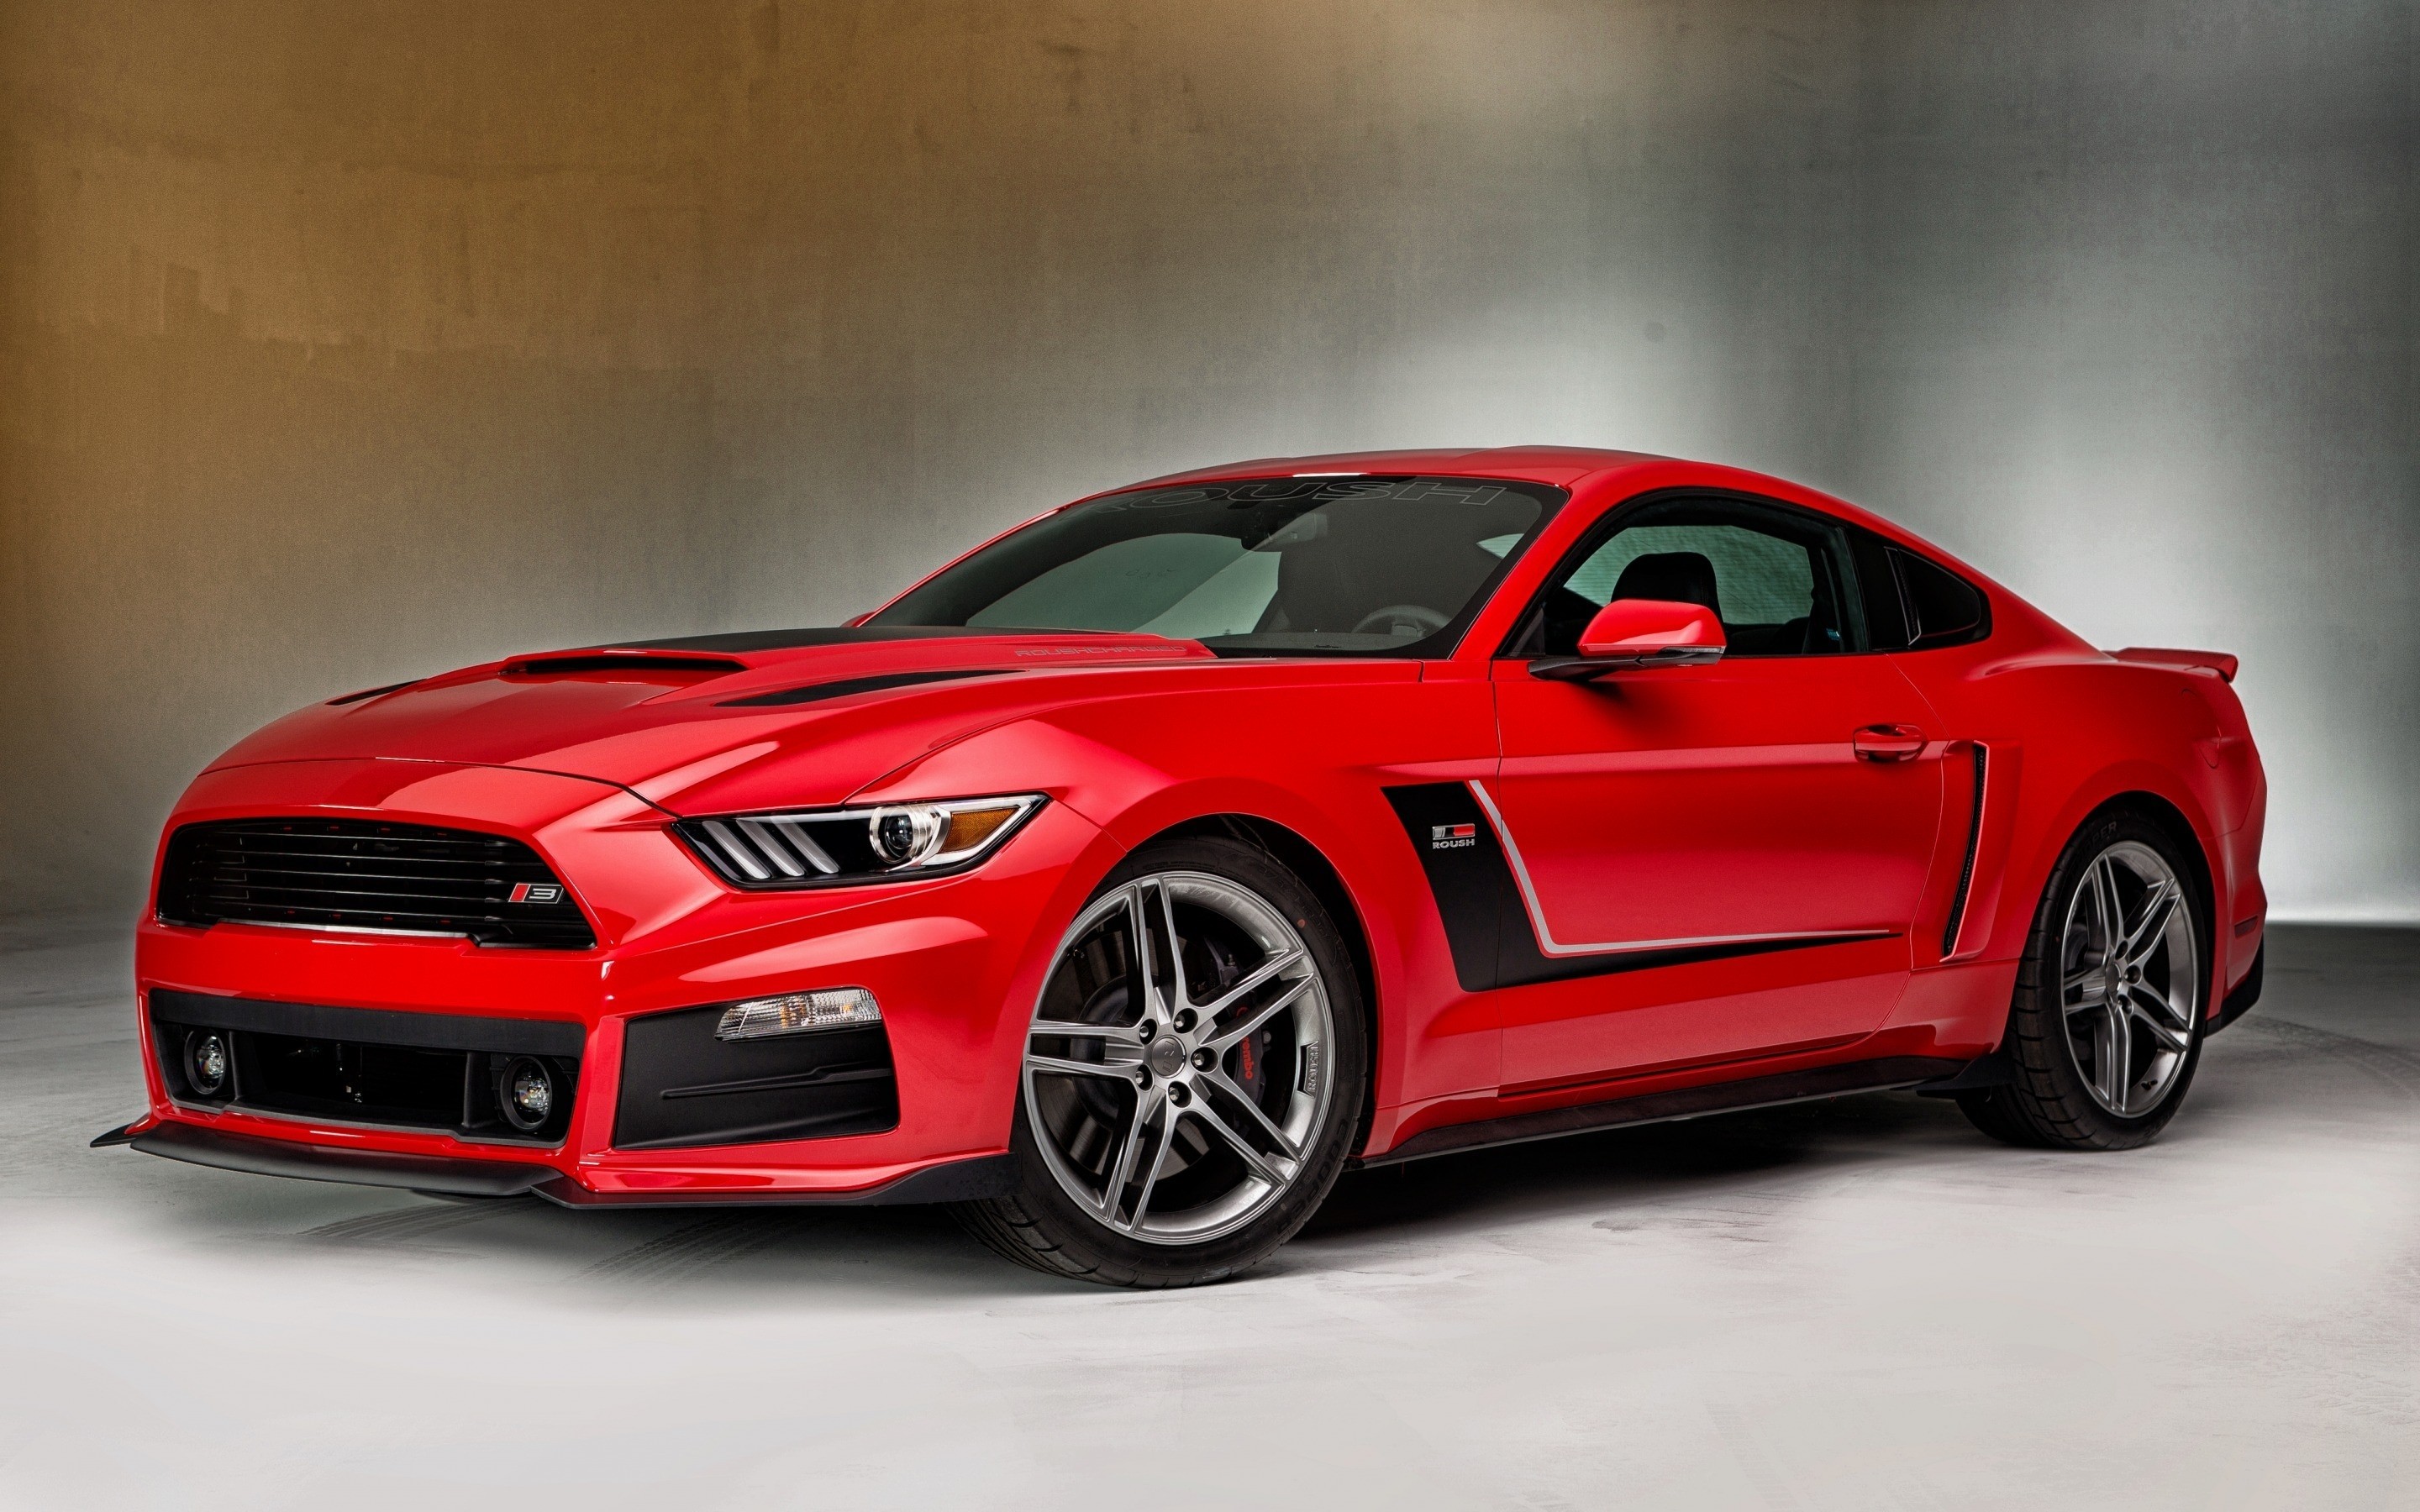 2880x1800 ... wallpapers; gourgeous red ford mustang 2880 x 1800 retina display  wallpaper ...